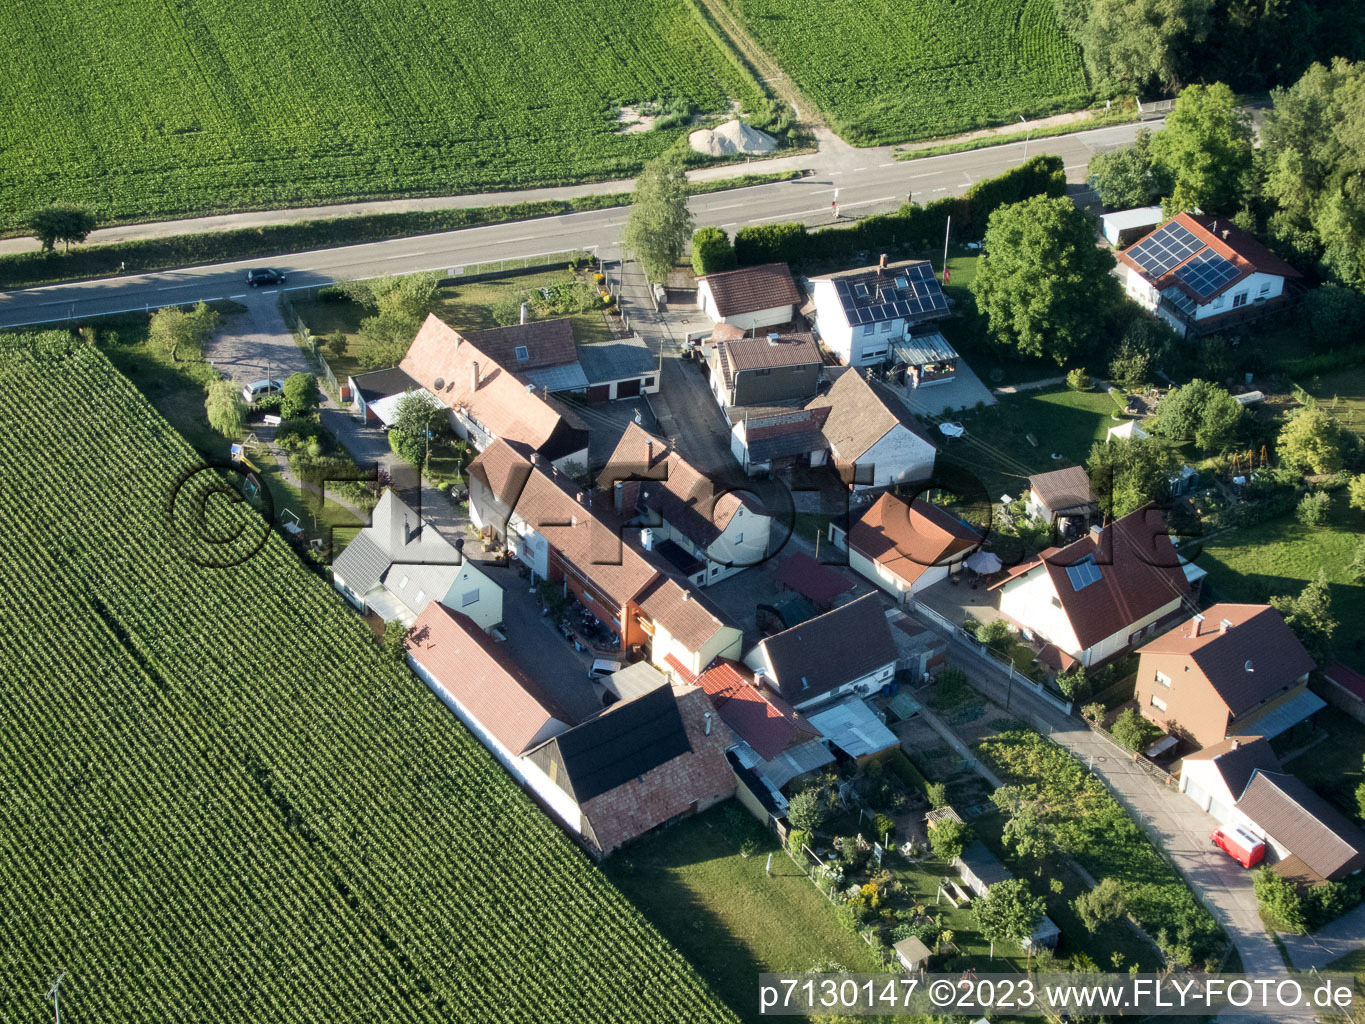 Minfeld in the state Rhineland-Palatinate, Germany seen from a drone